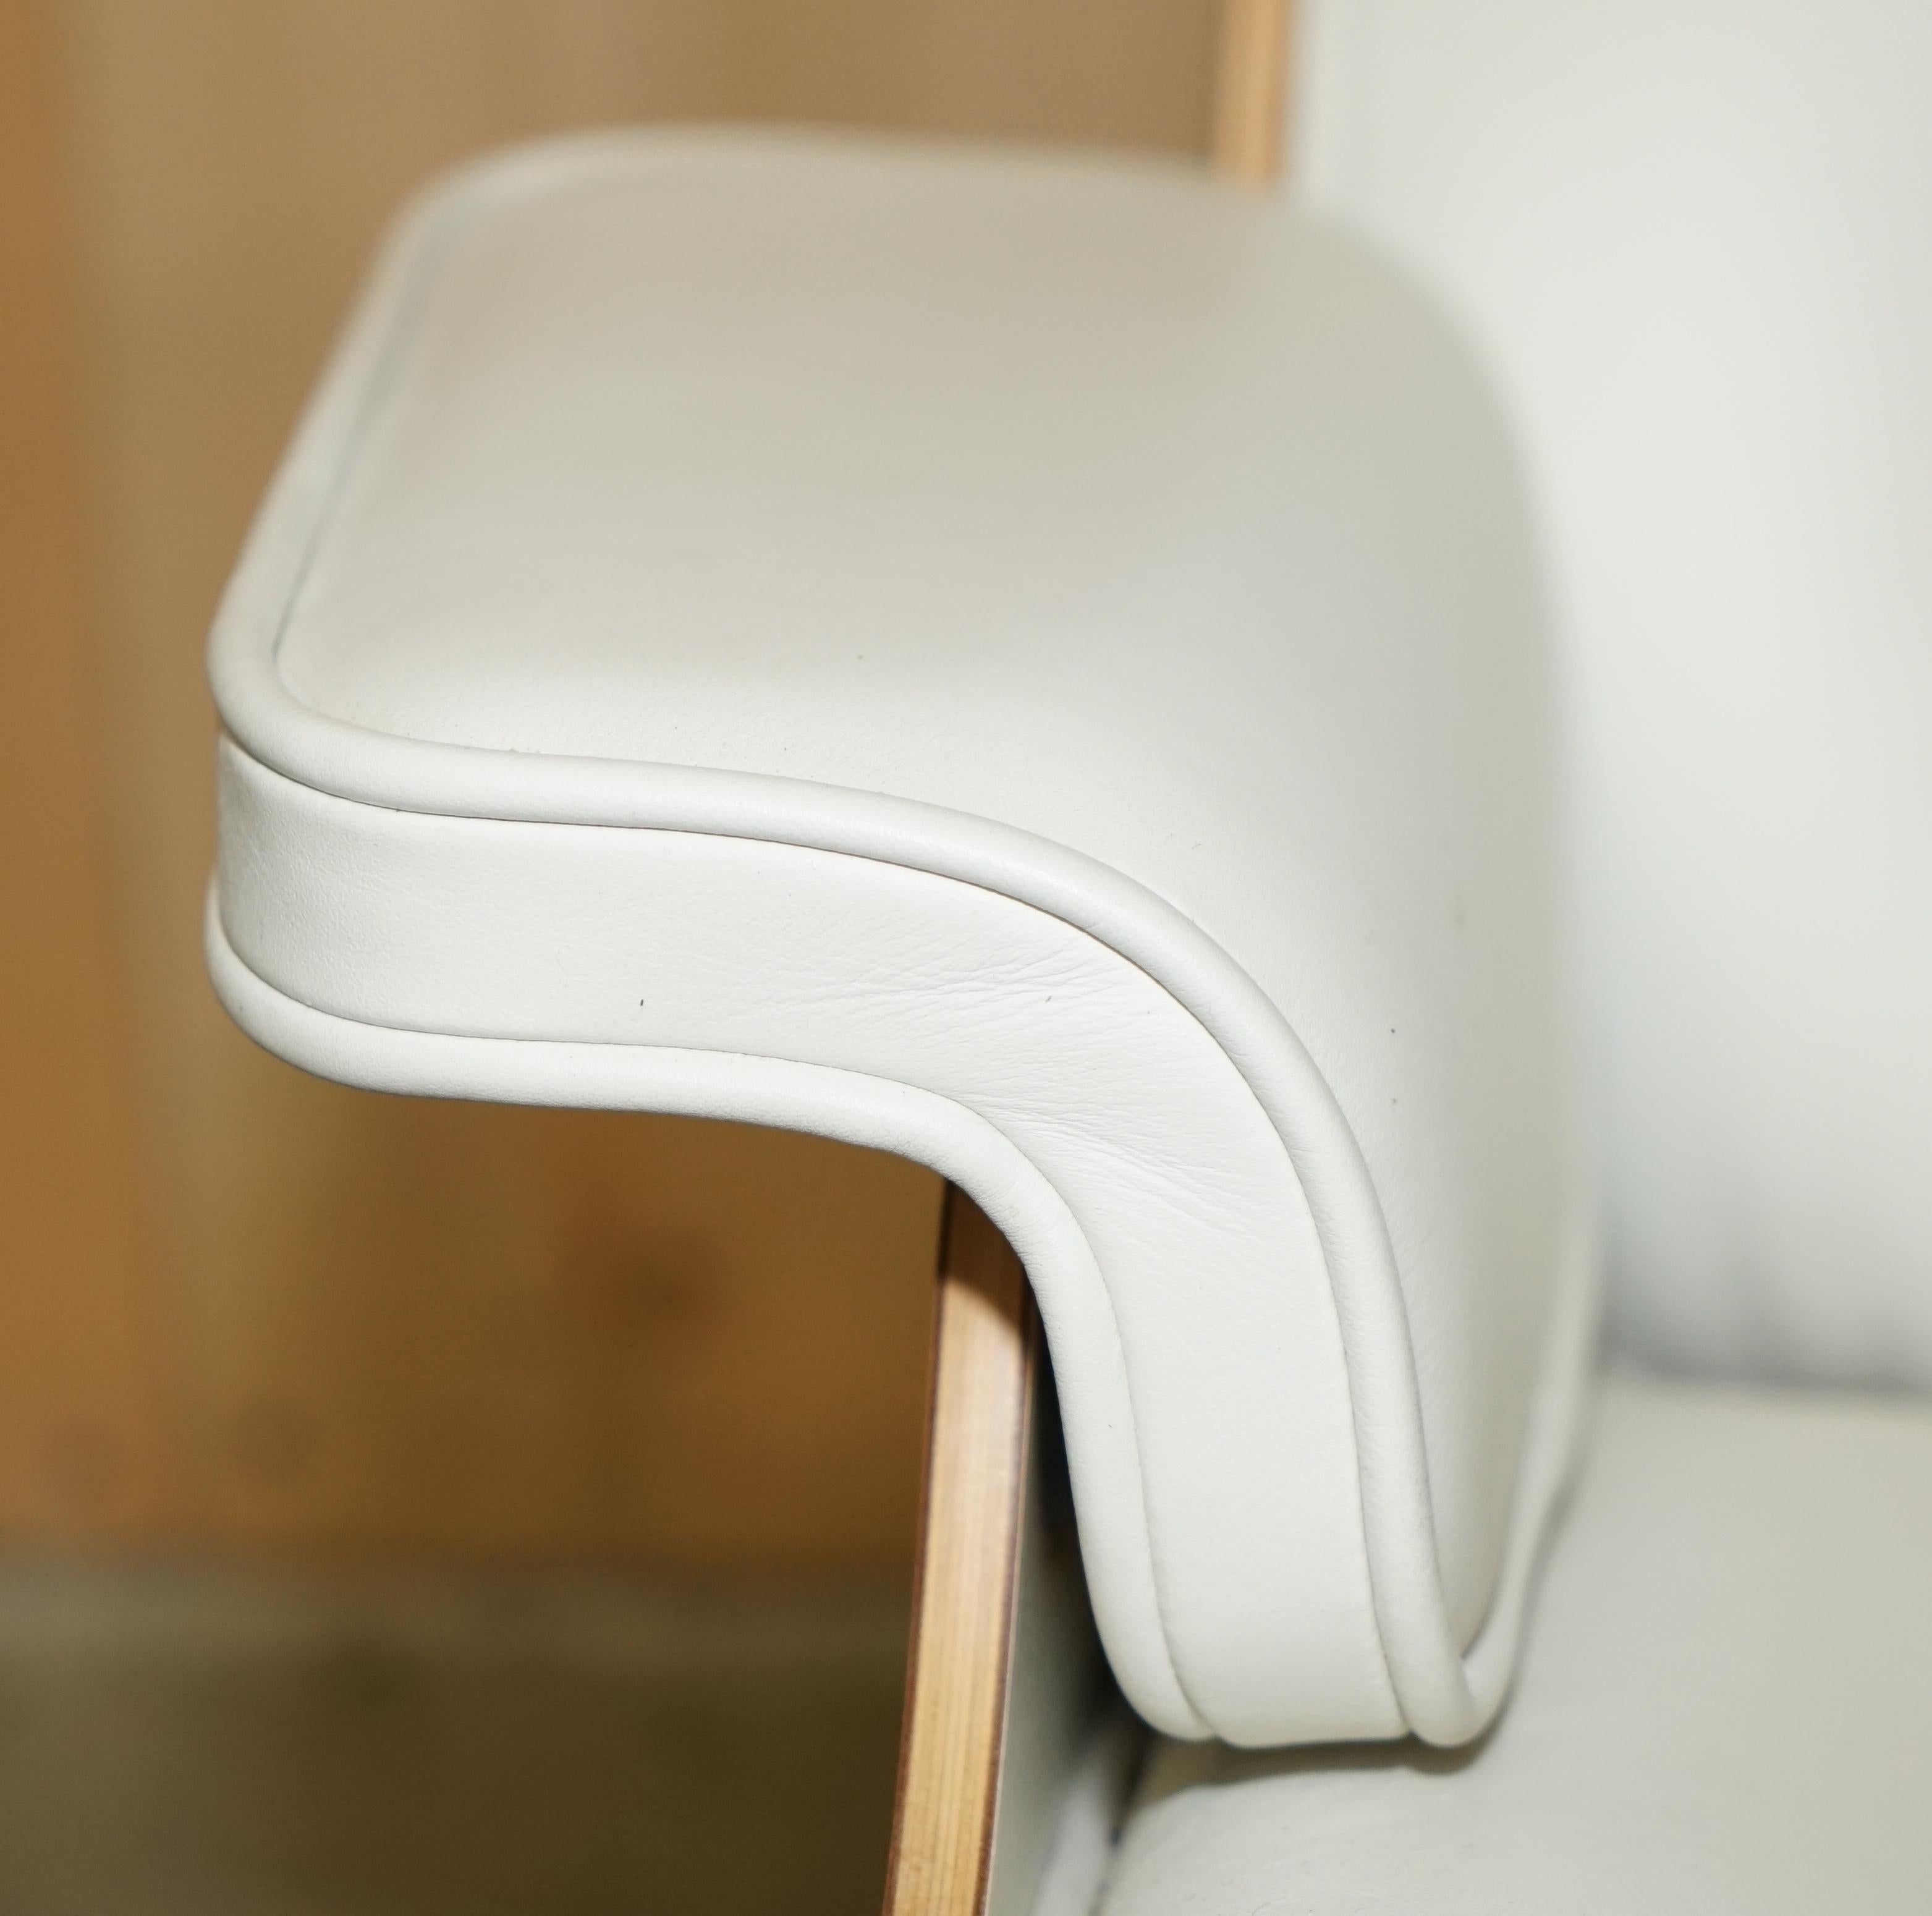 Cuir Whiting fauteuil de salon Charles and Ray Eames american cherry wood white leather en vente